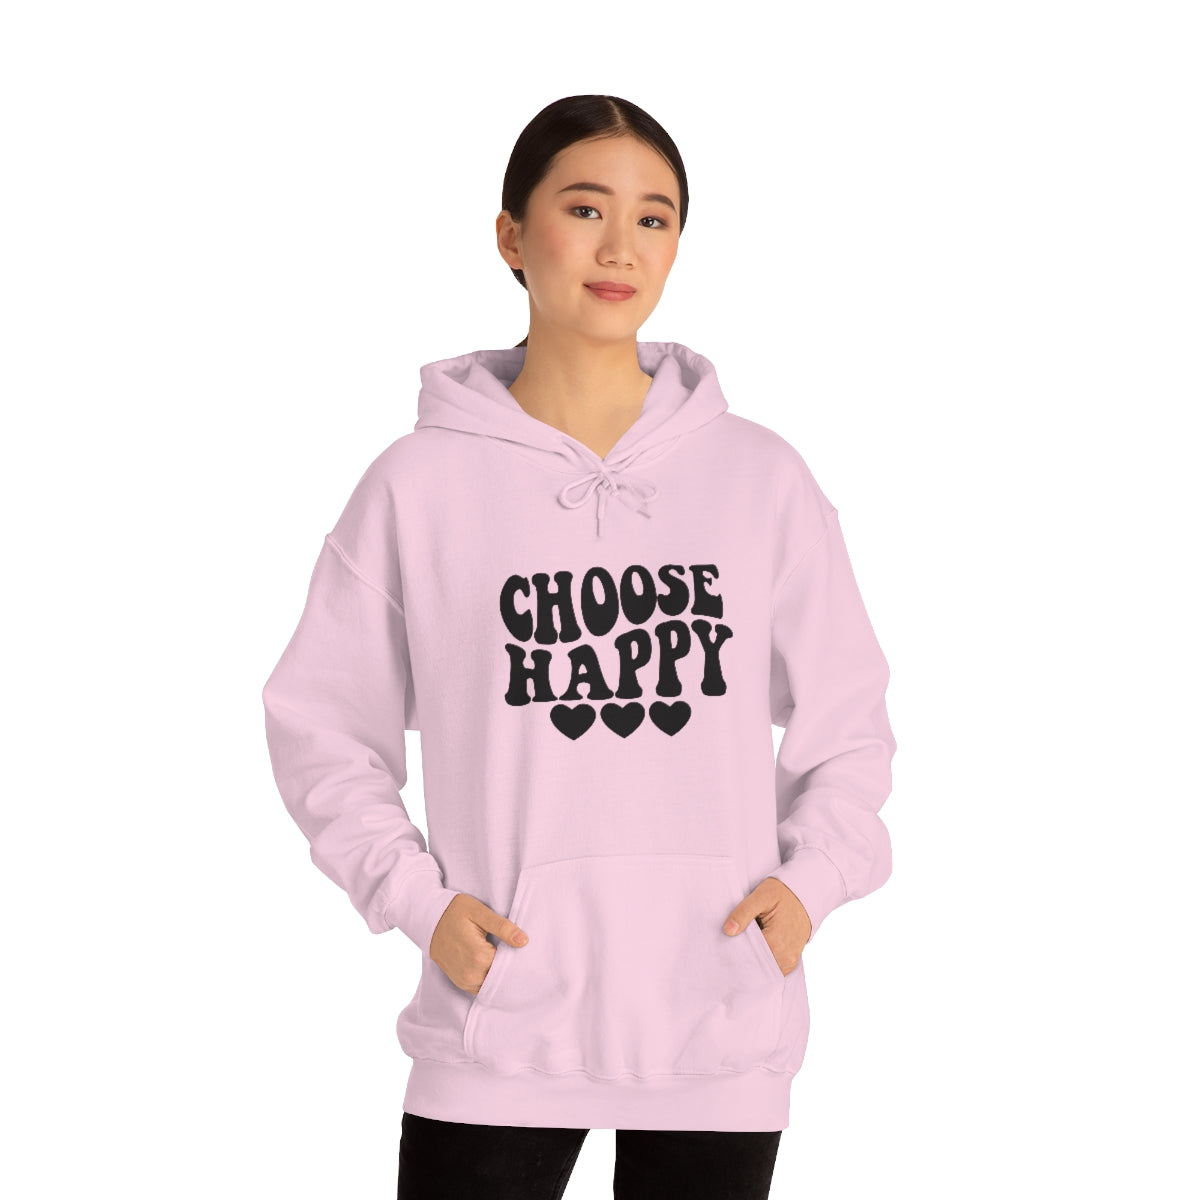 Choose Happiness Every Day with Our "Choose Happy" Sweatshirt